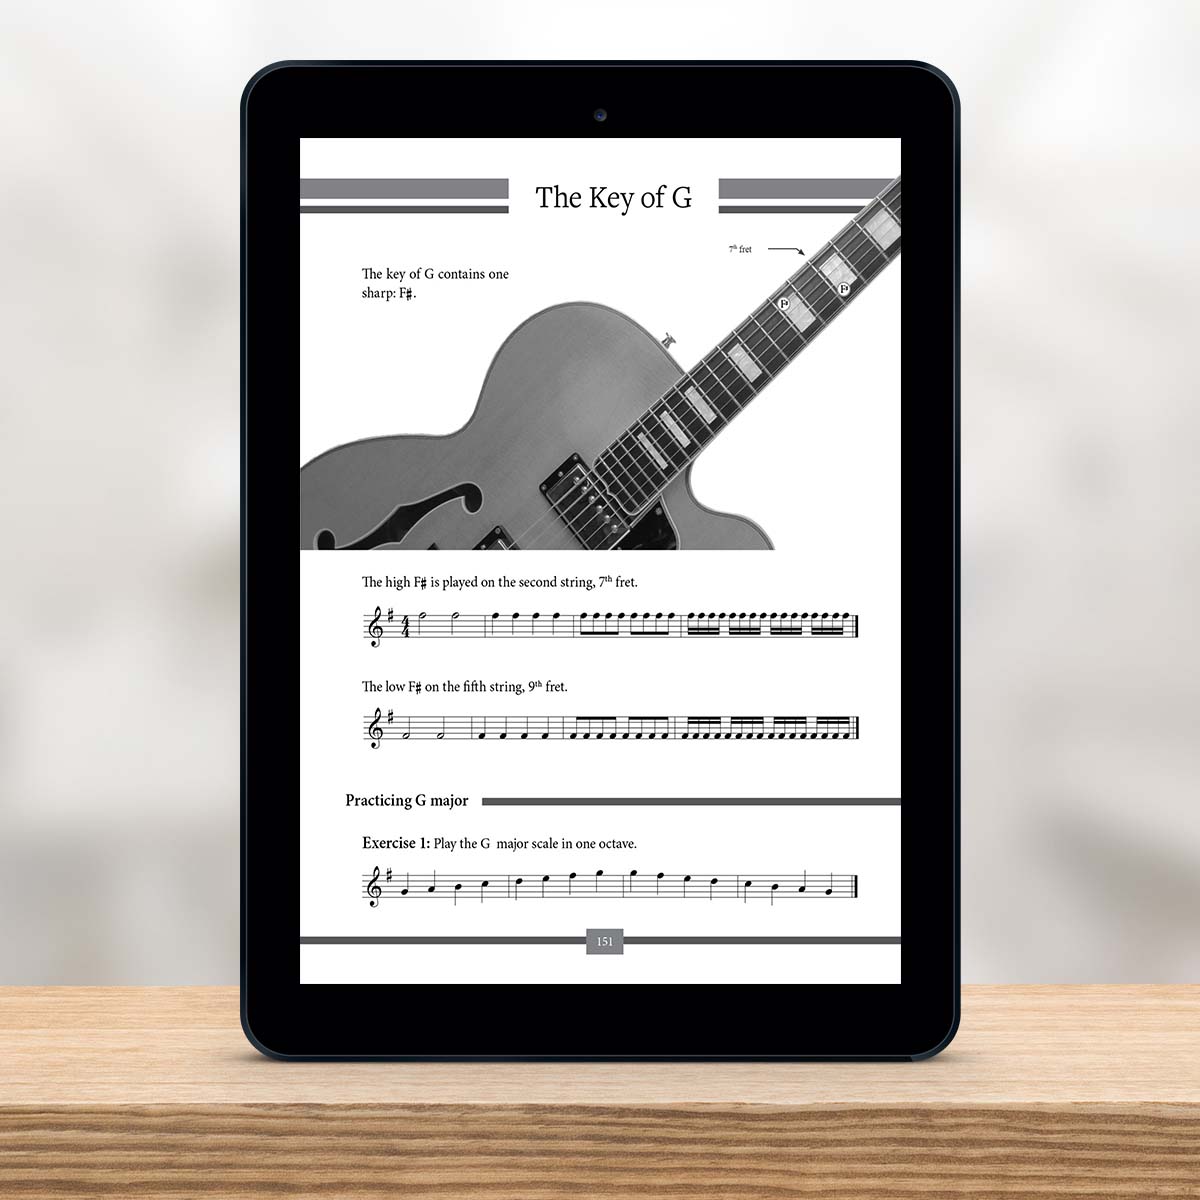 Digital Tablet showing a page from The Missing Method for Guitar Note Reading Series Book 4 by Christian Triola